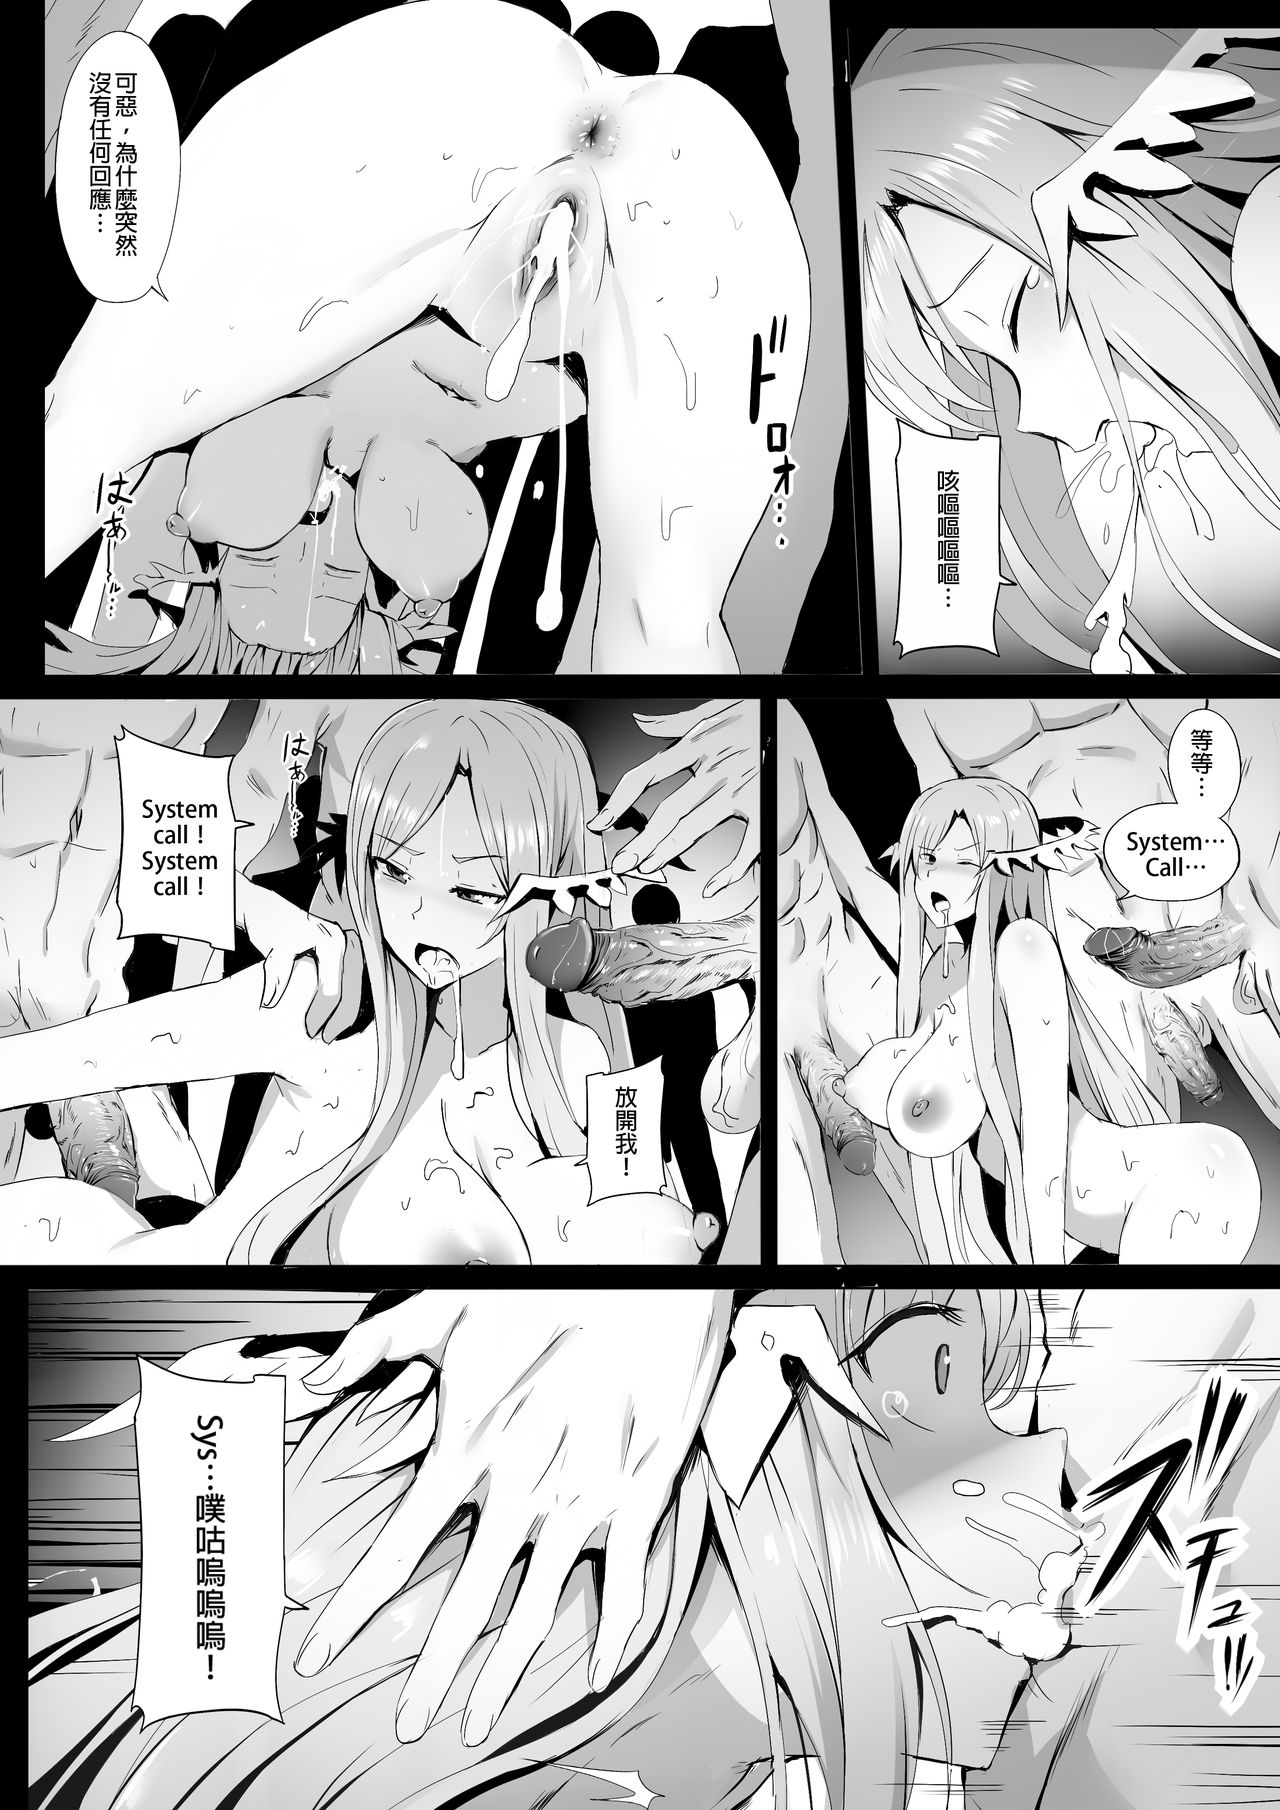 [Ginhaha] Error Of Call: System Call (Sword Art Online) [Chinese] page 7 full